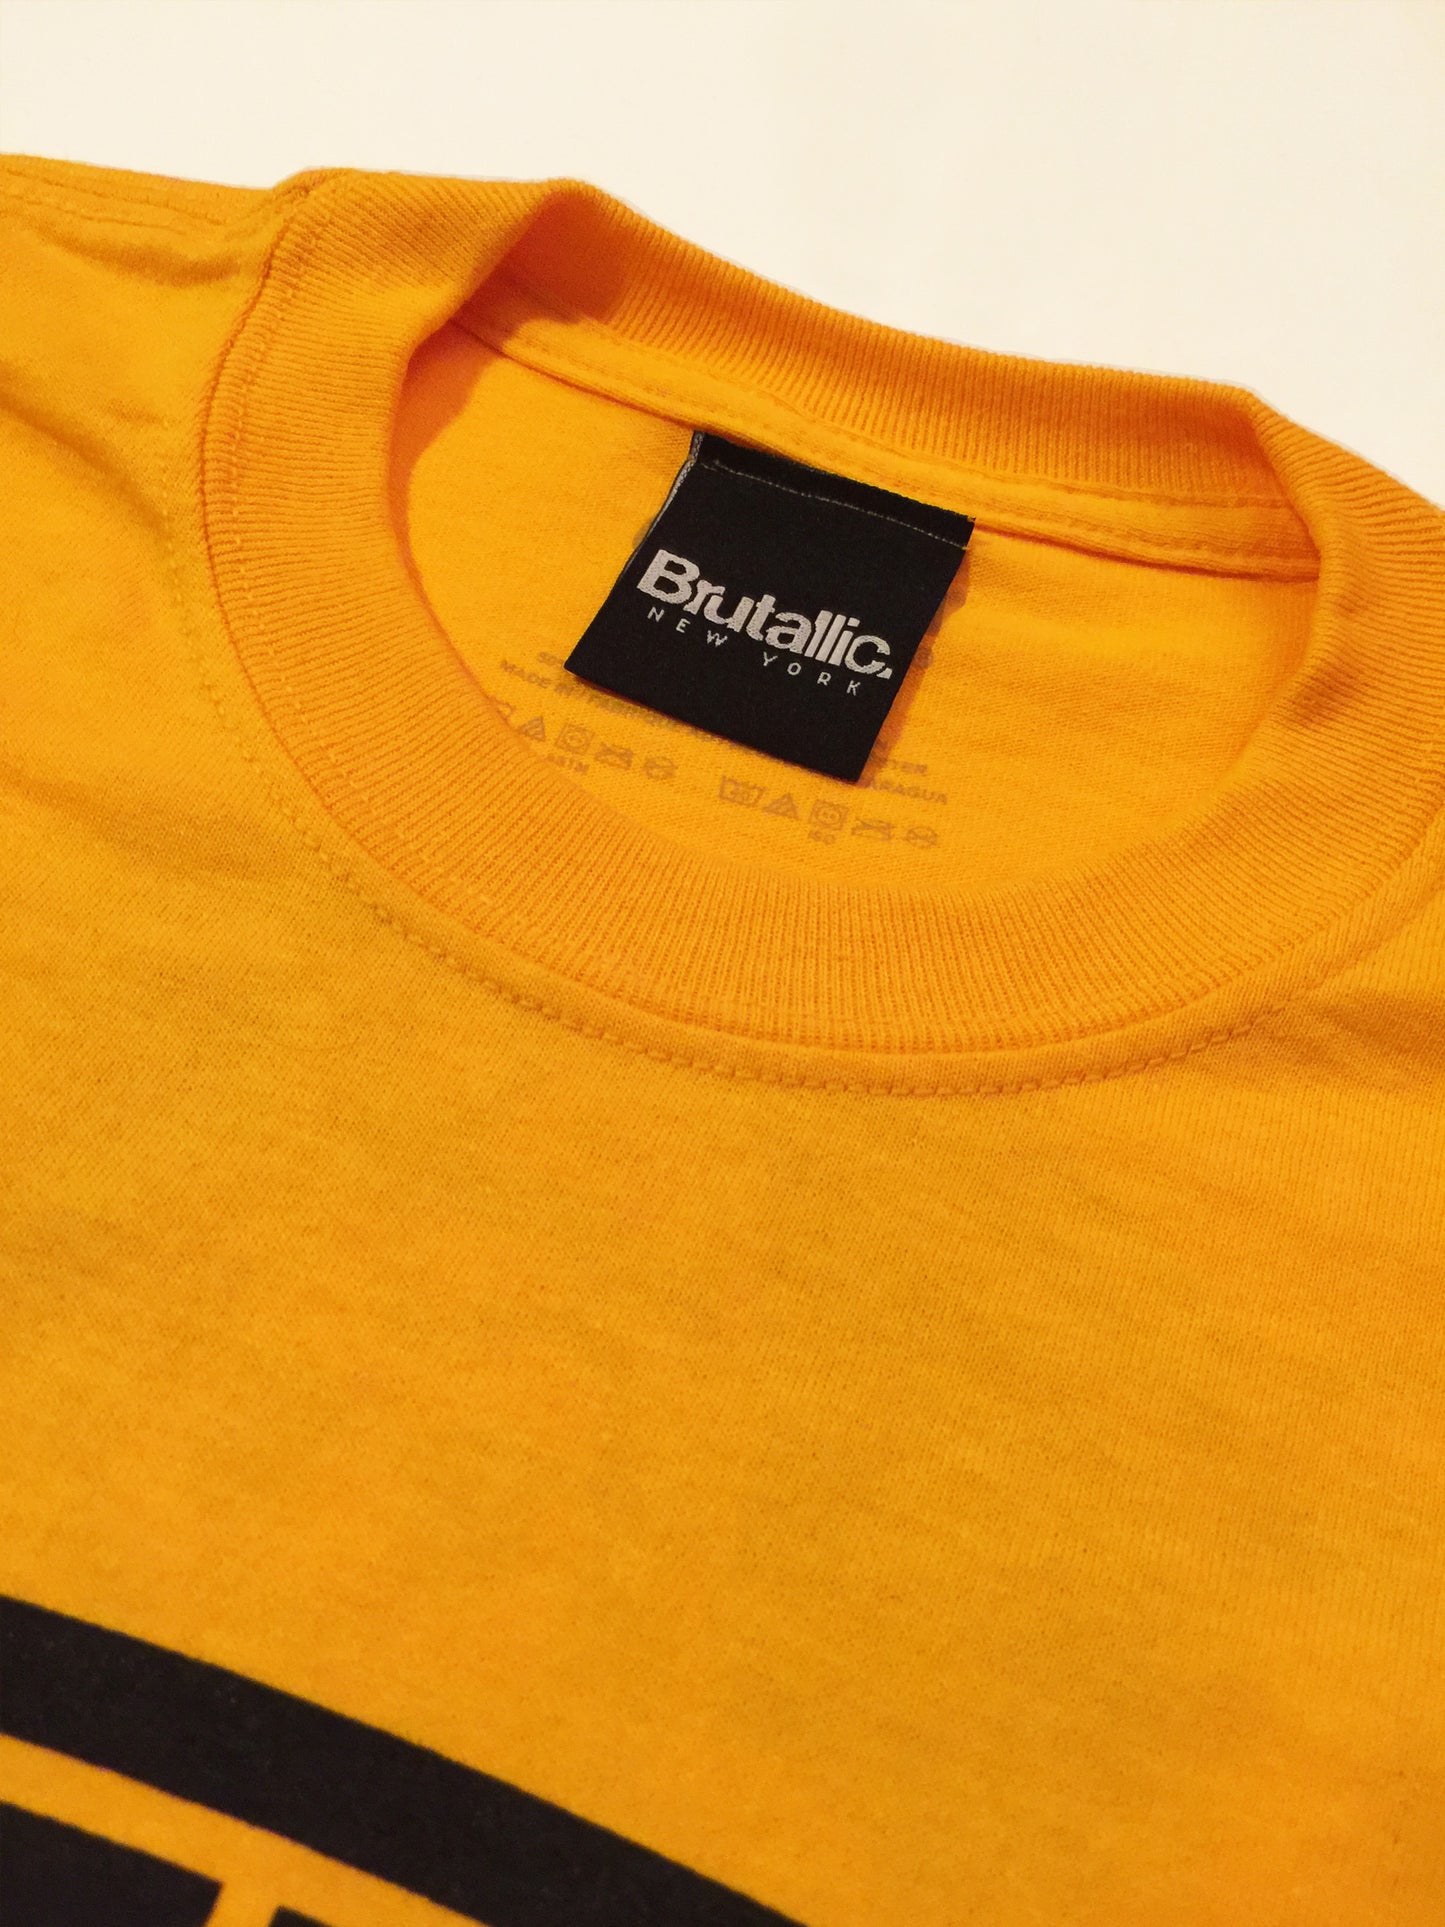 Brutallic Streetwear bubble tee tshirt with oval front logo, and buddha on the back, mustard yellow color, close up of neck collar label